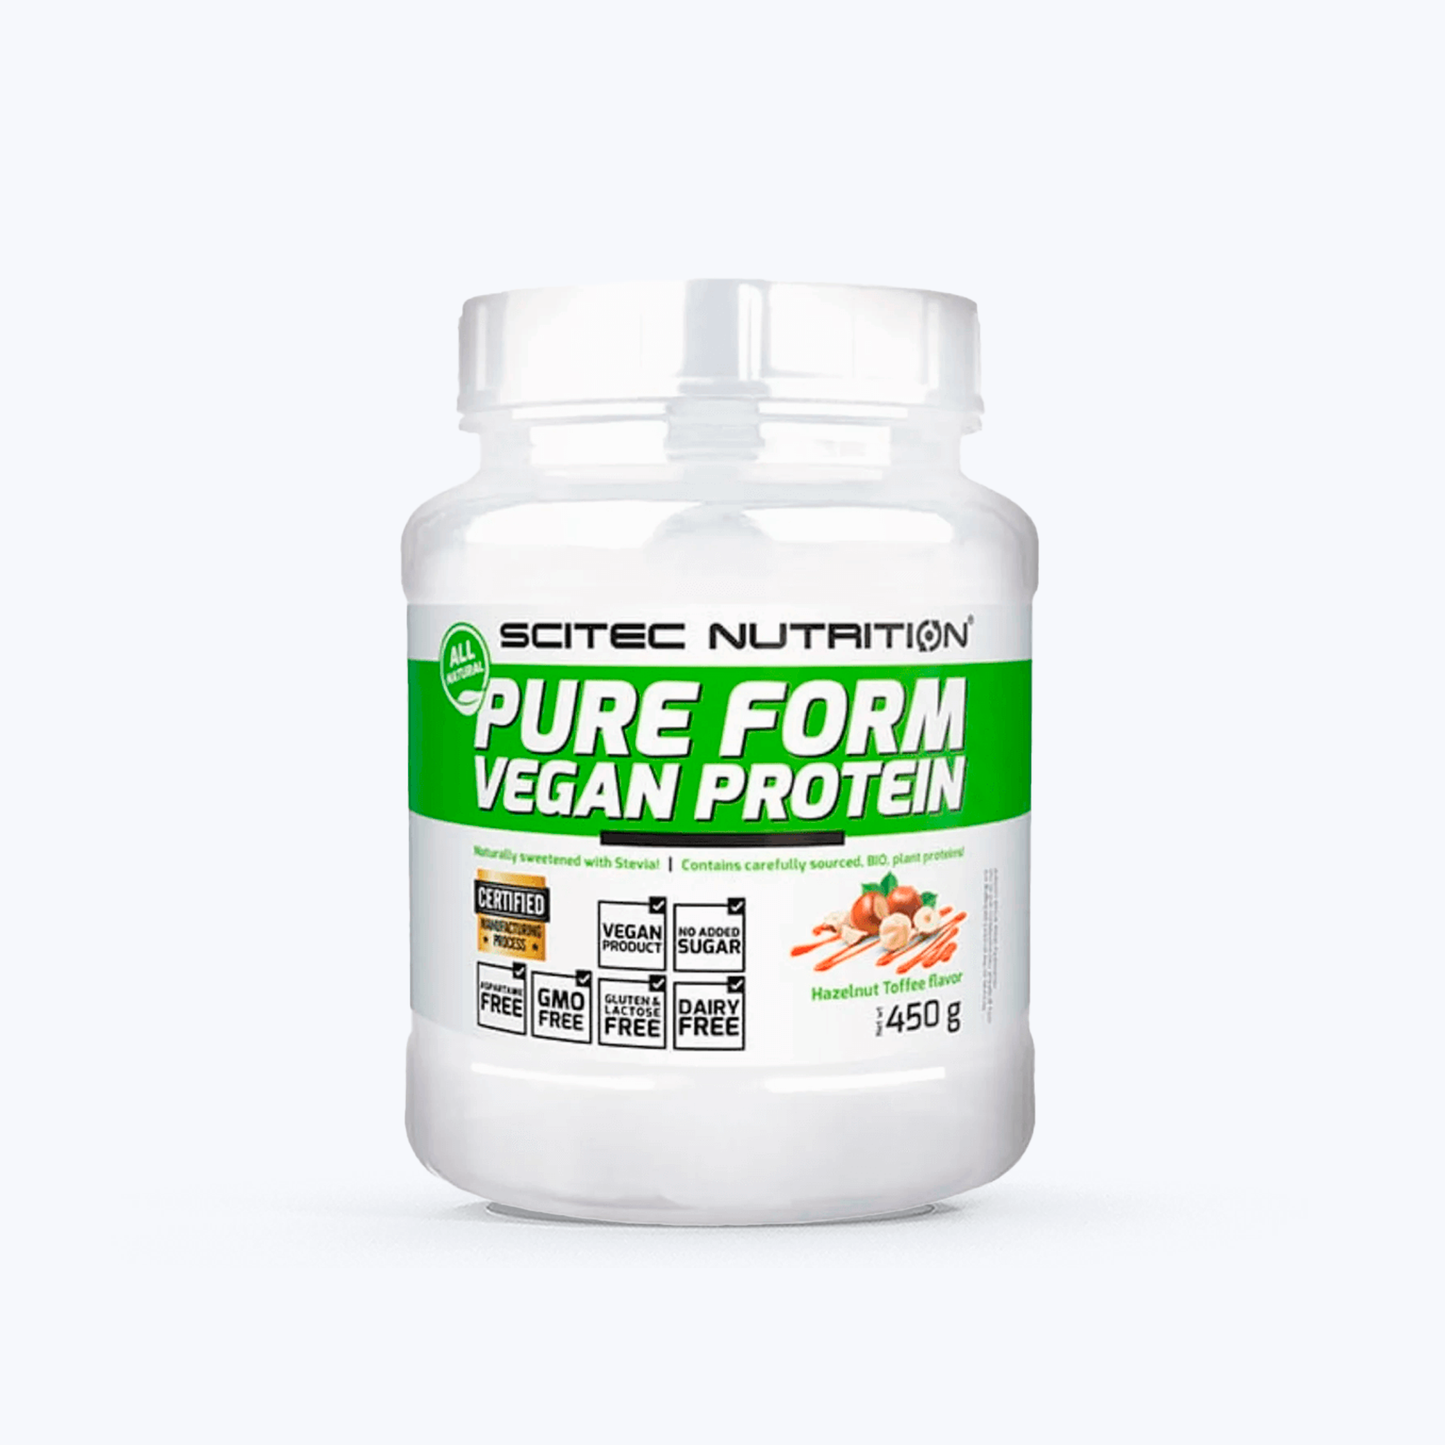 PURE FROM VEGAN PROTEIN